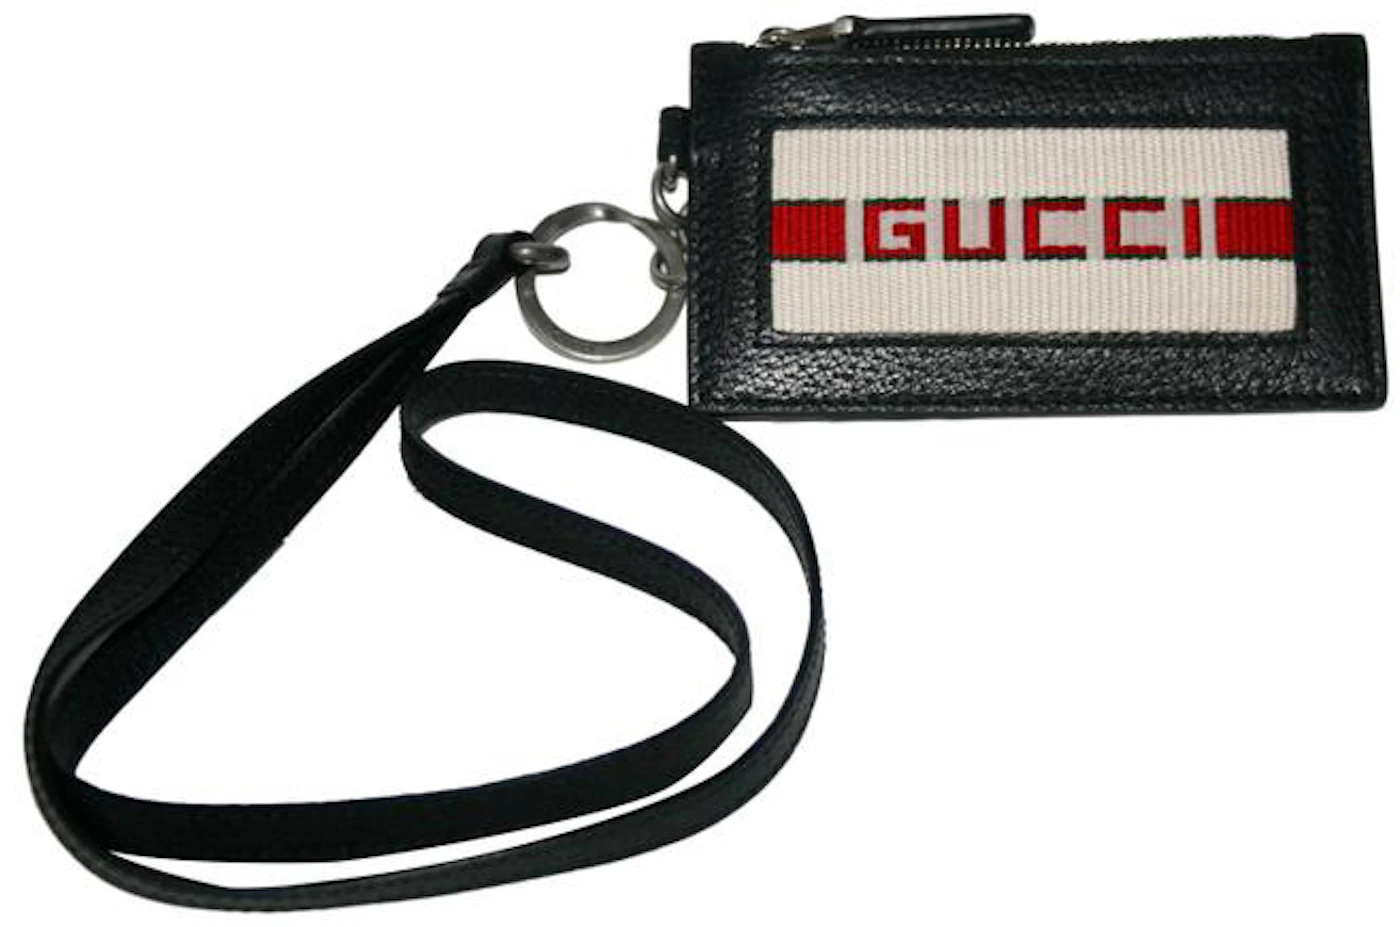 Gucci Zumi Card Case Wallet Strawberry Ivory Multicolor in Leather